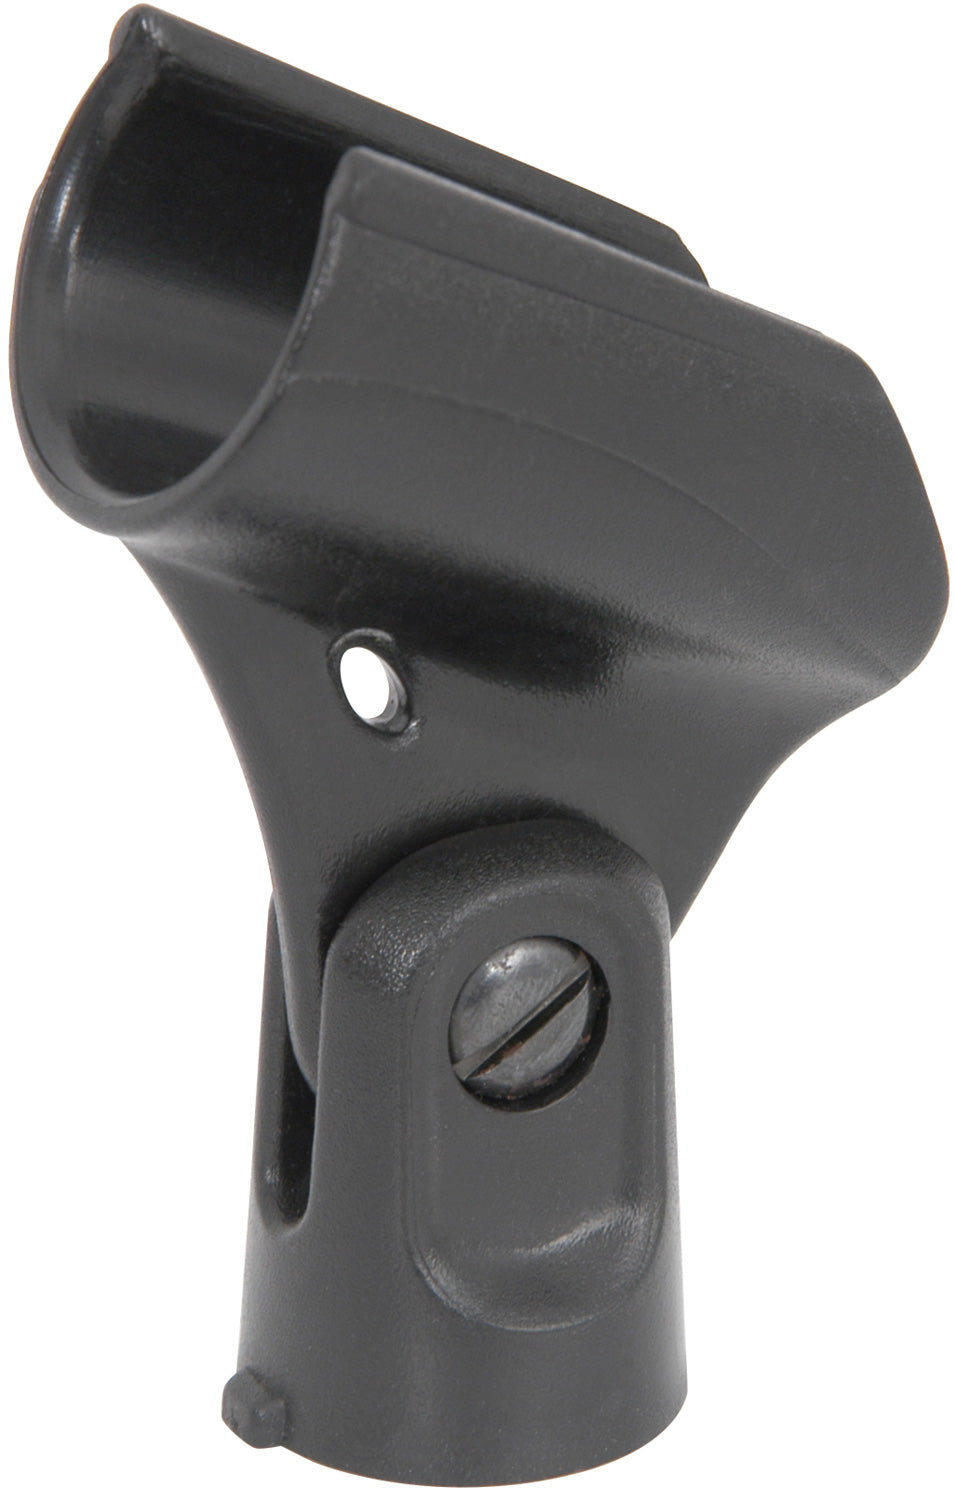 Chord Plastic Microphone Holder - Up to 30mm